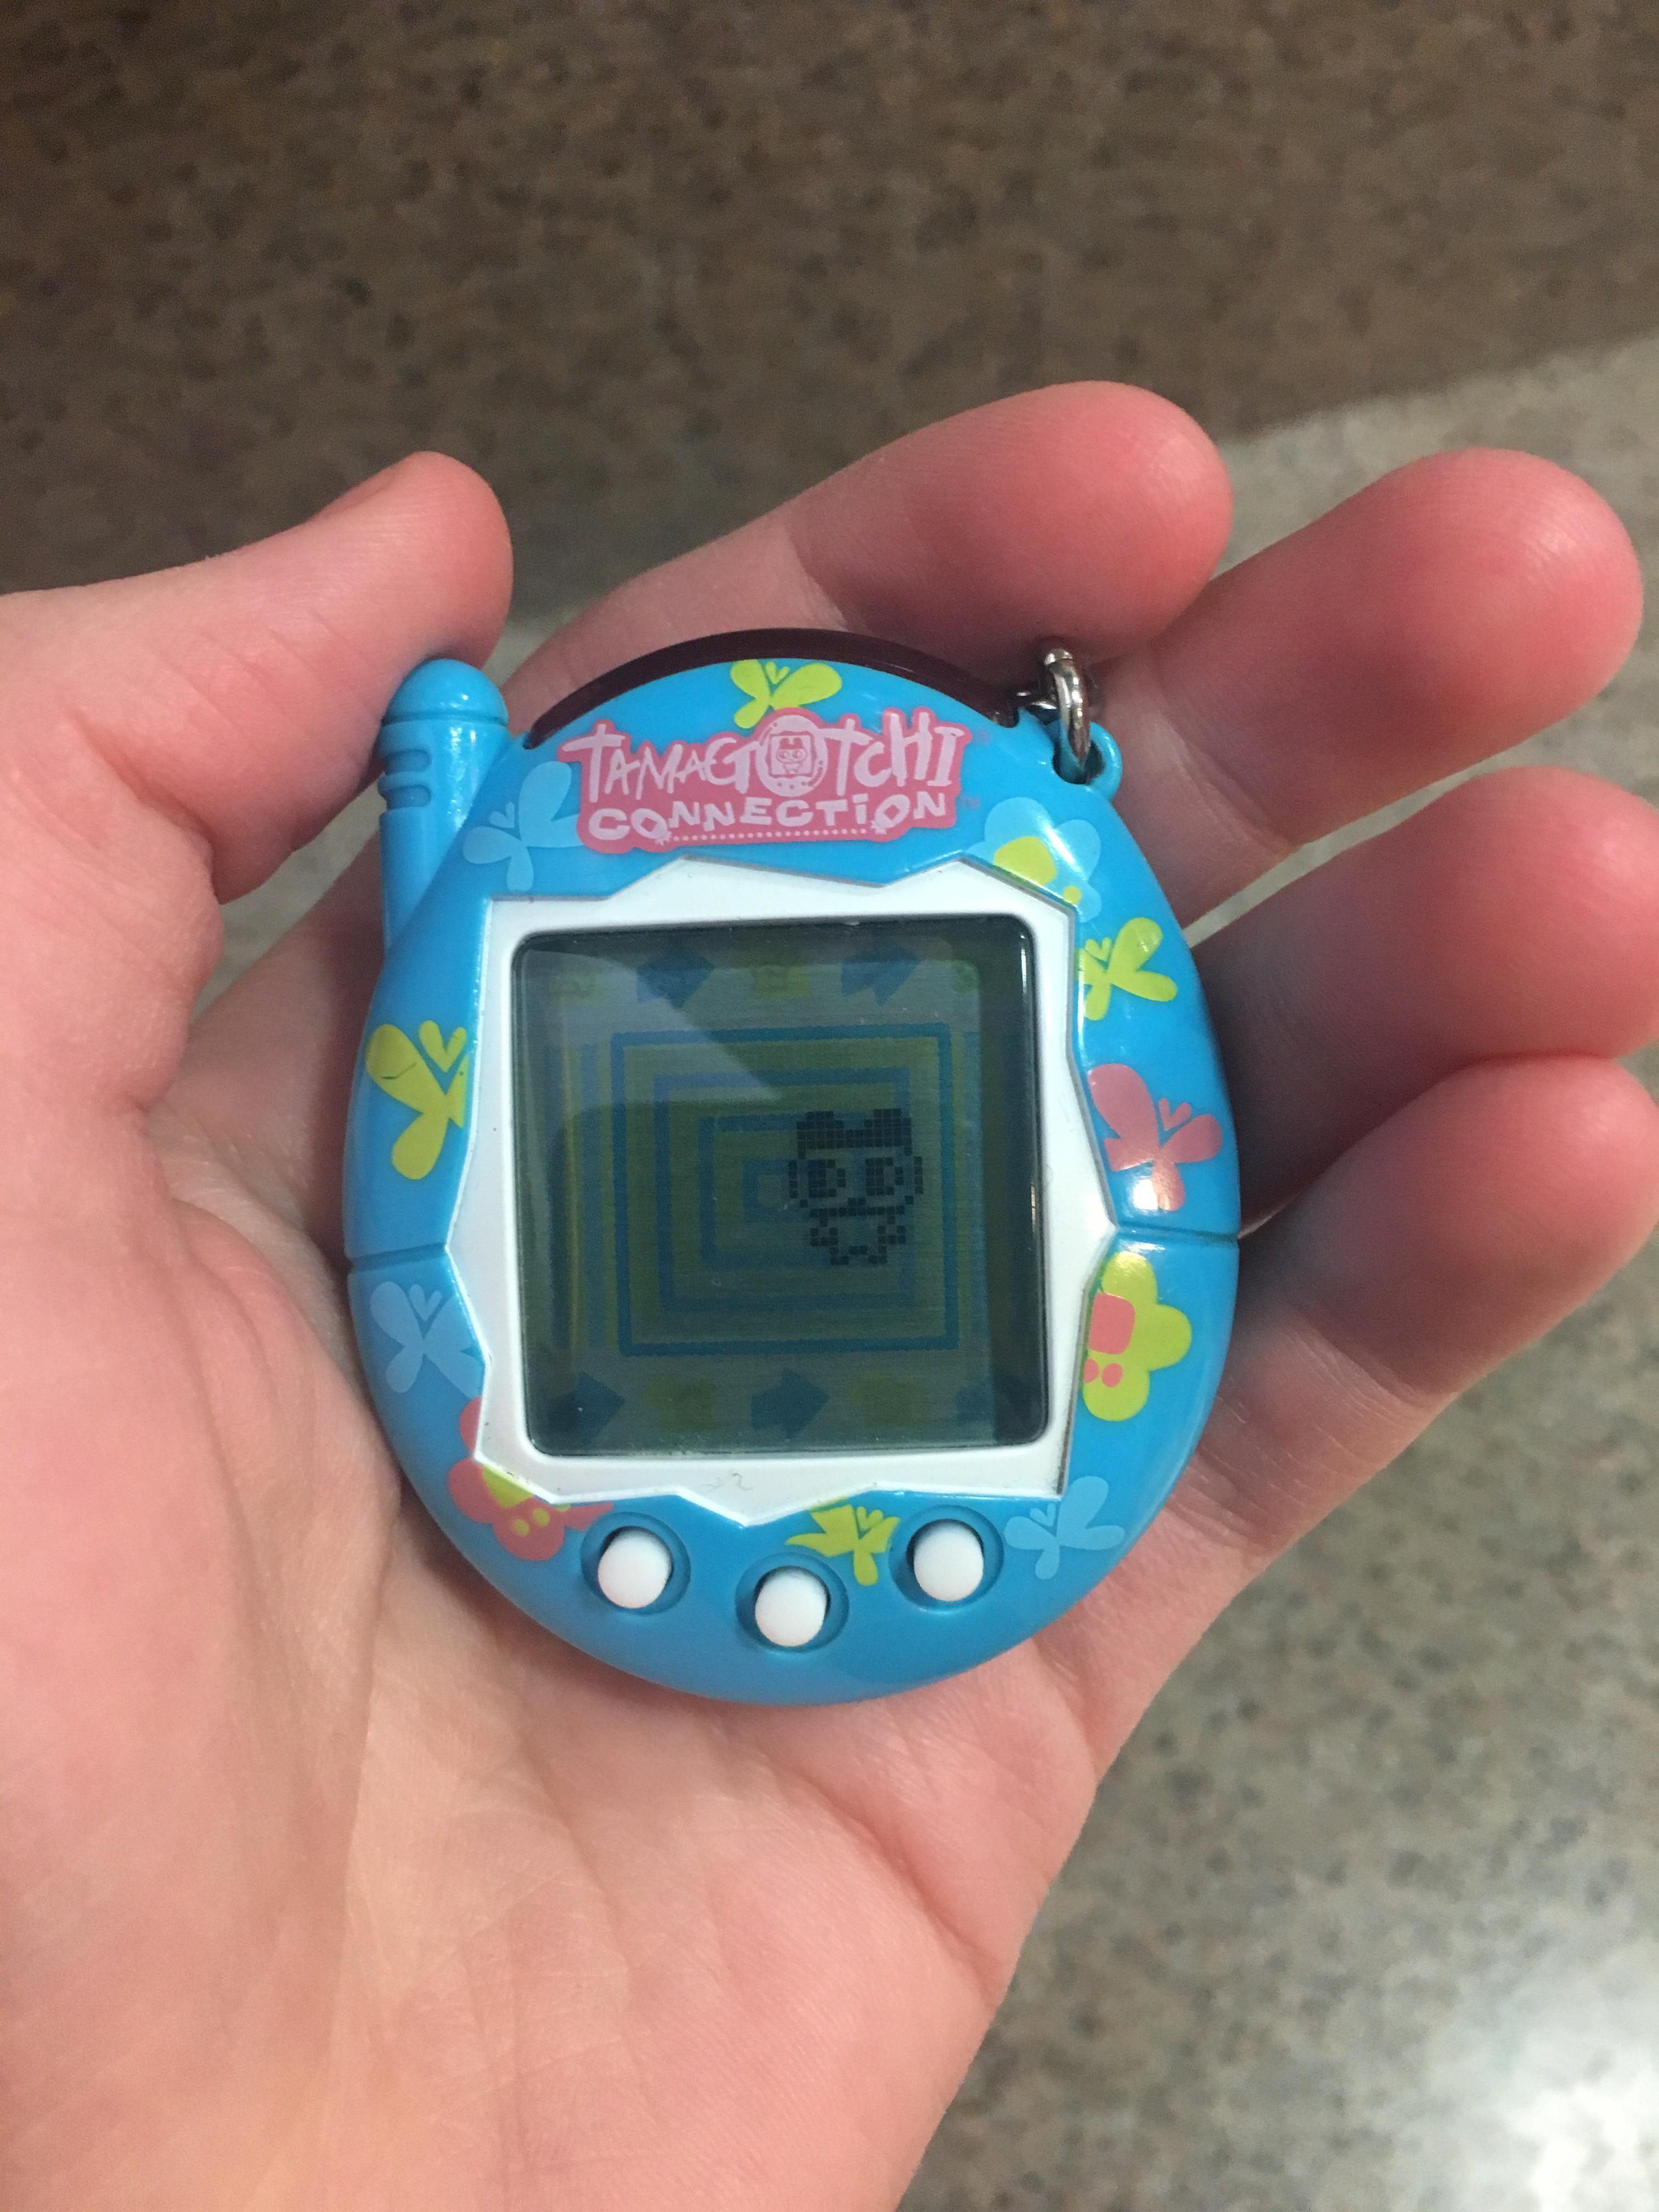 What Is A Tamagotchi Connection newkb